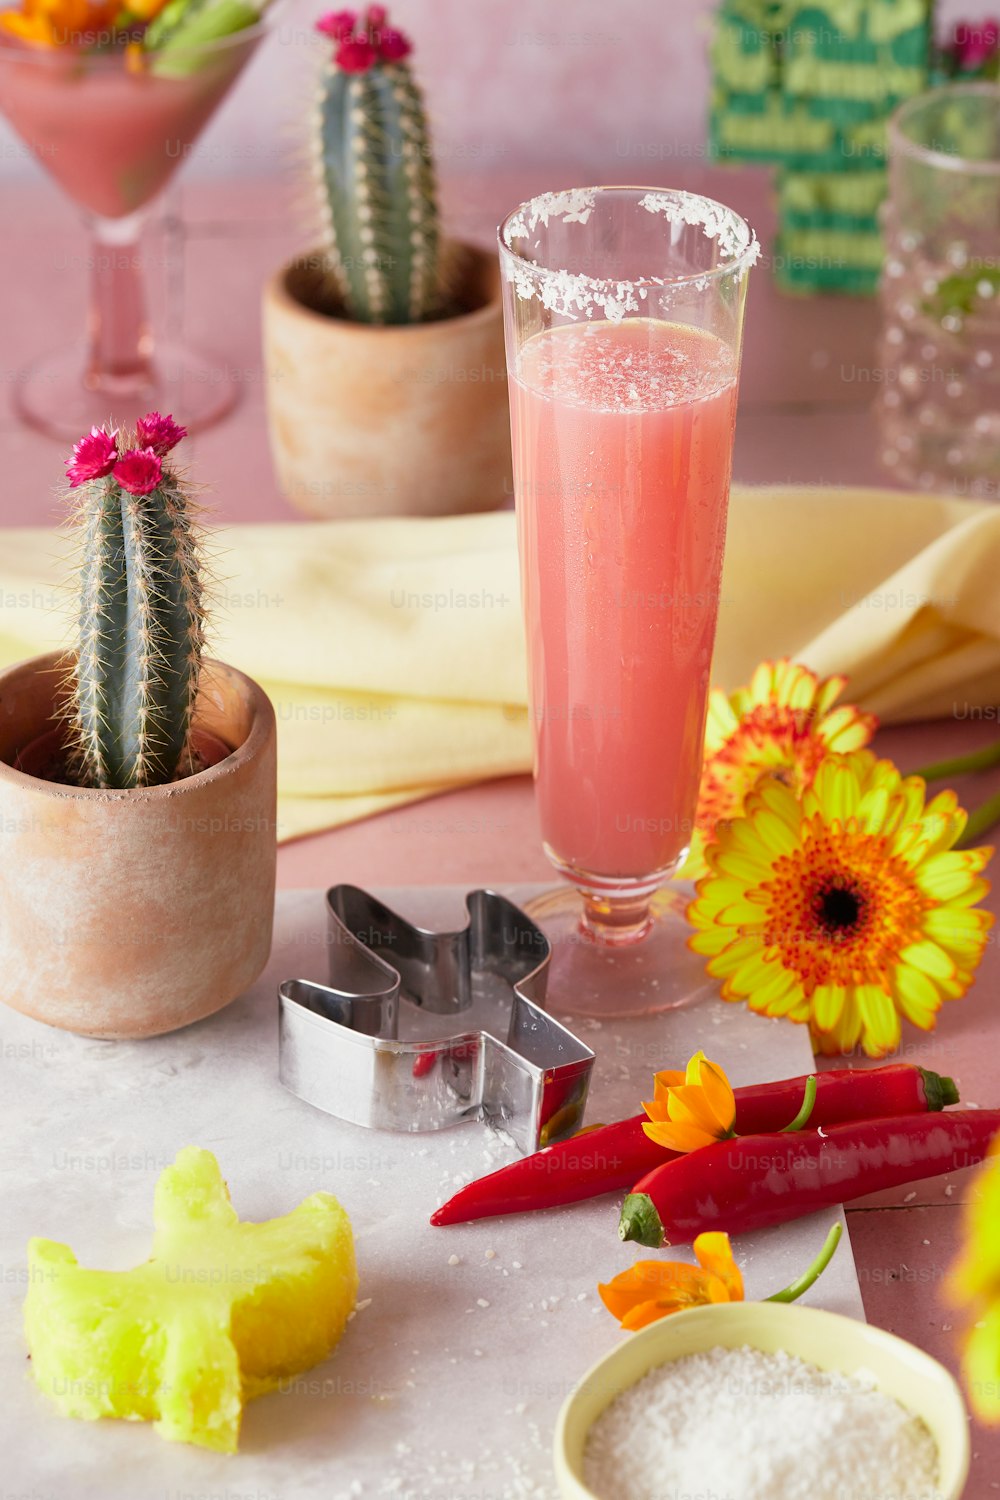 a table topped with a glass of pink liquid next to a cactus